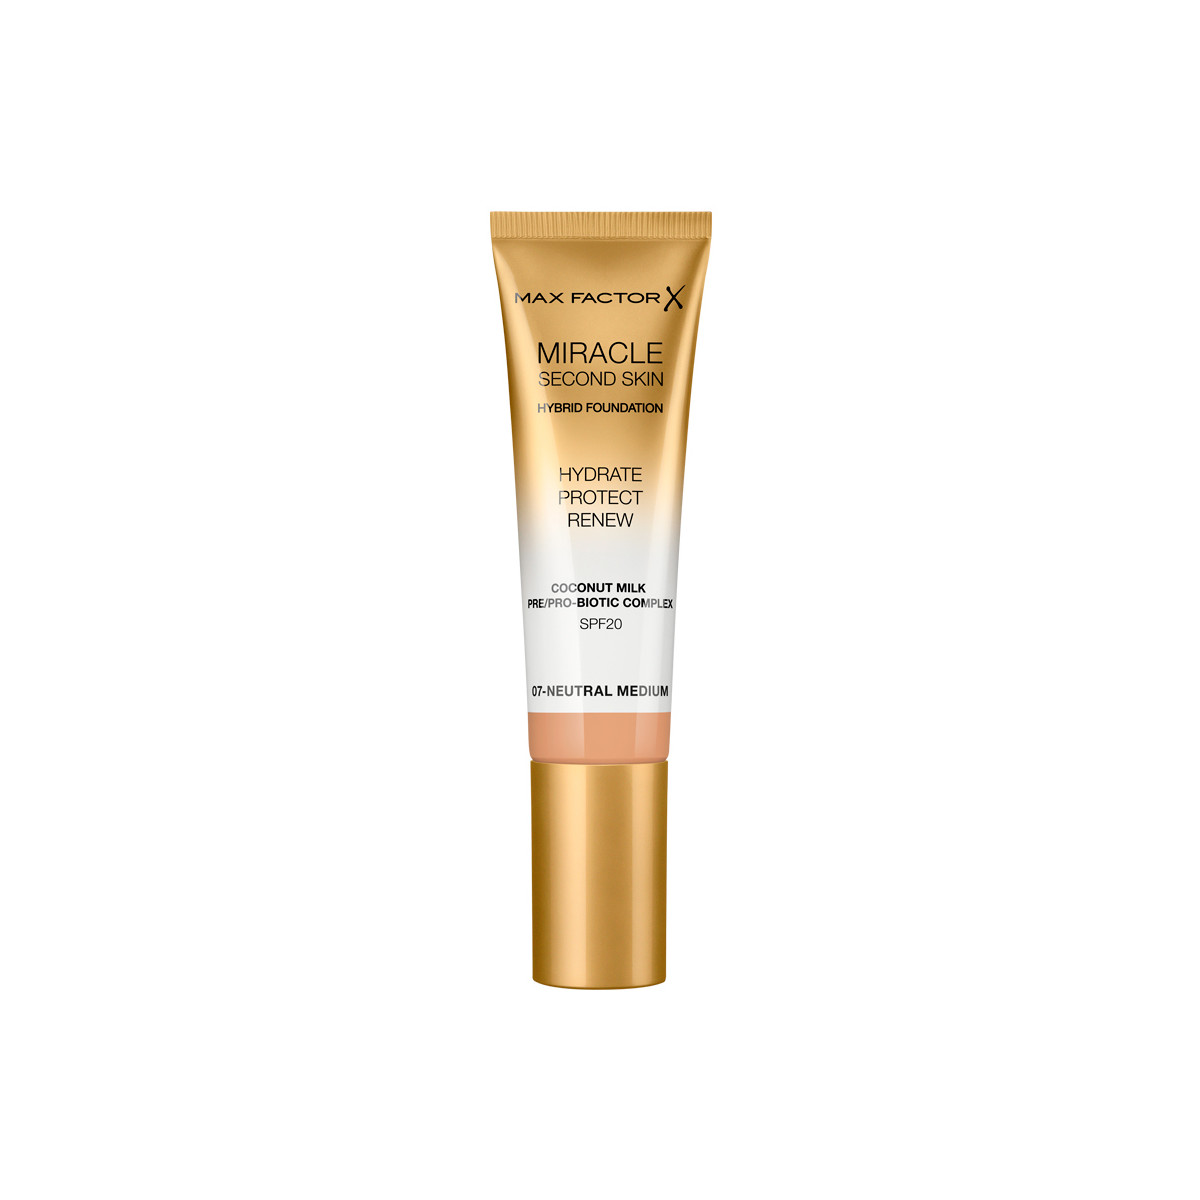 Belleza Base de maquillaje Max Factor Miracle Touch Second Skin Found.spf20 7-neutral Medium 